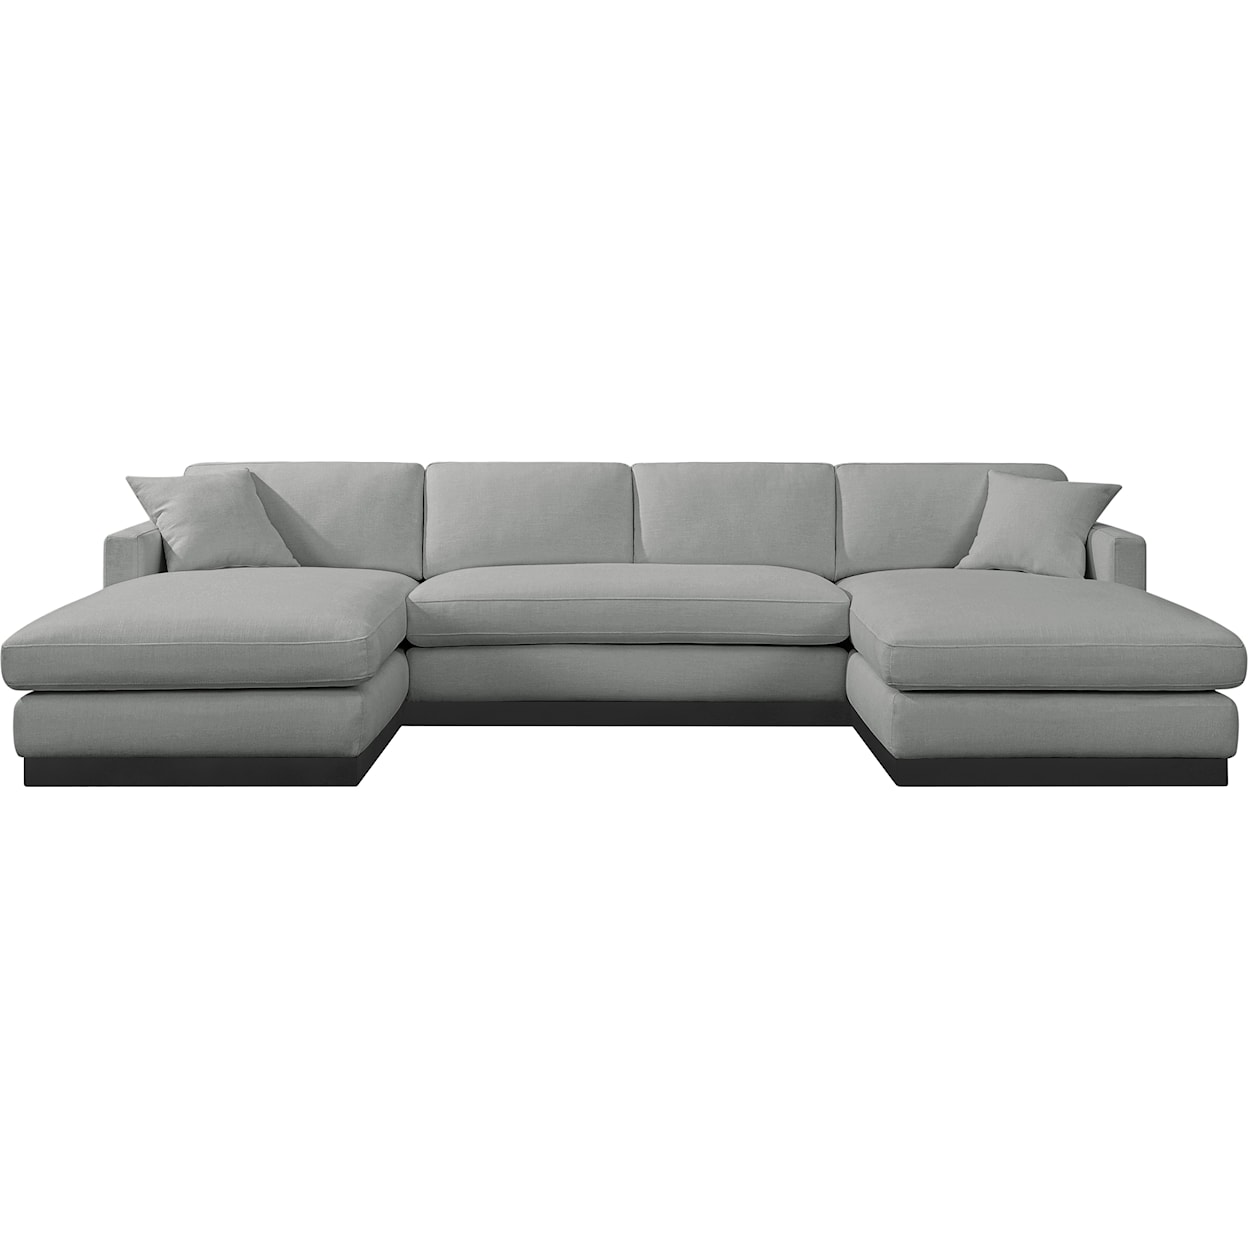 Meridian Furniture Johanna 3pc. Sectional (3 Boxes)